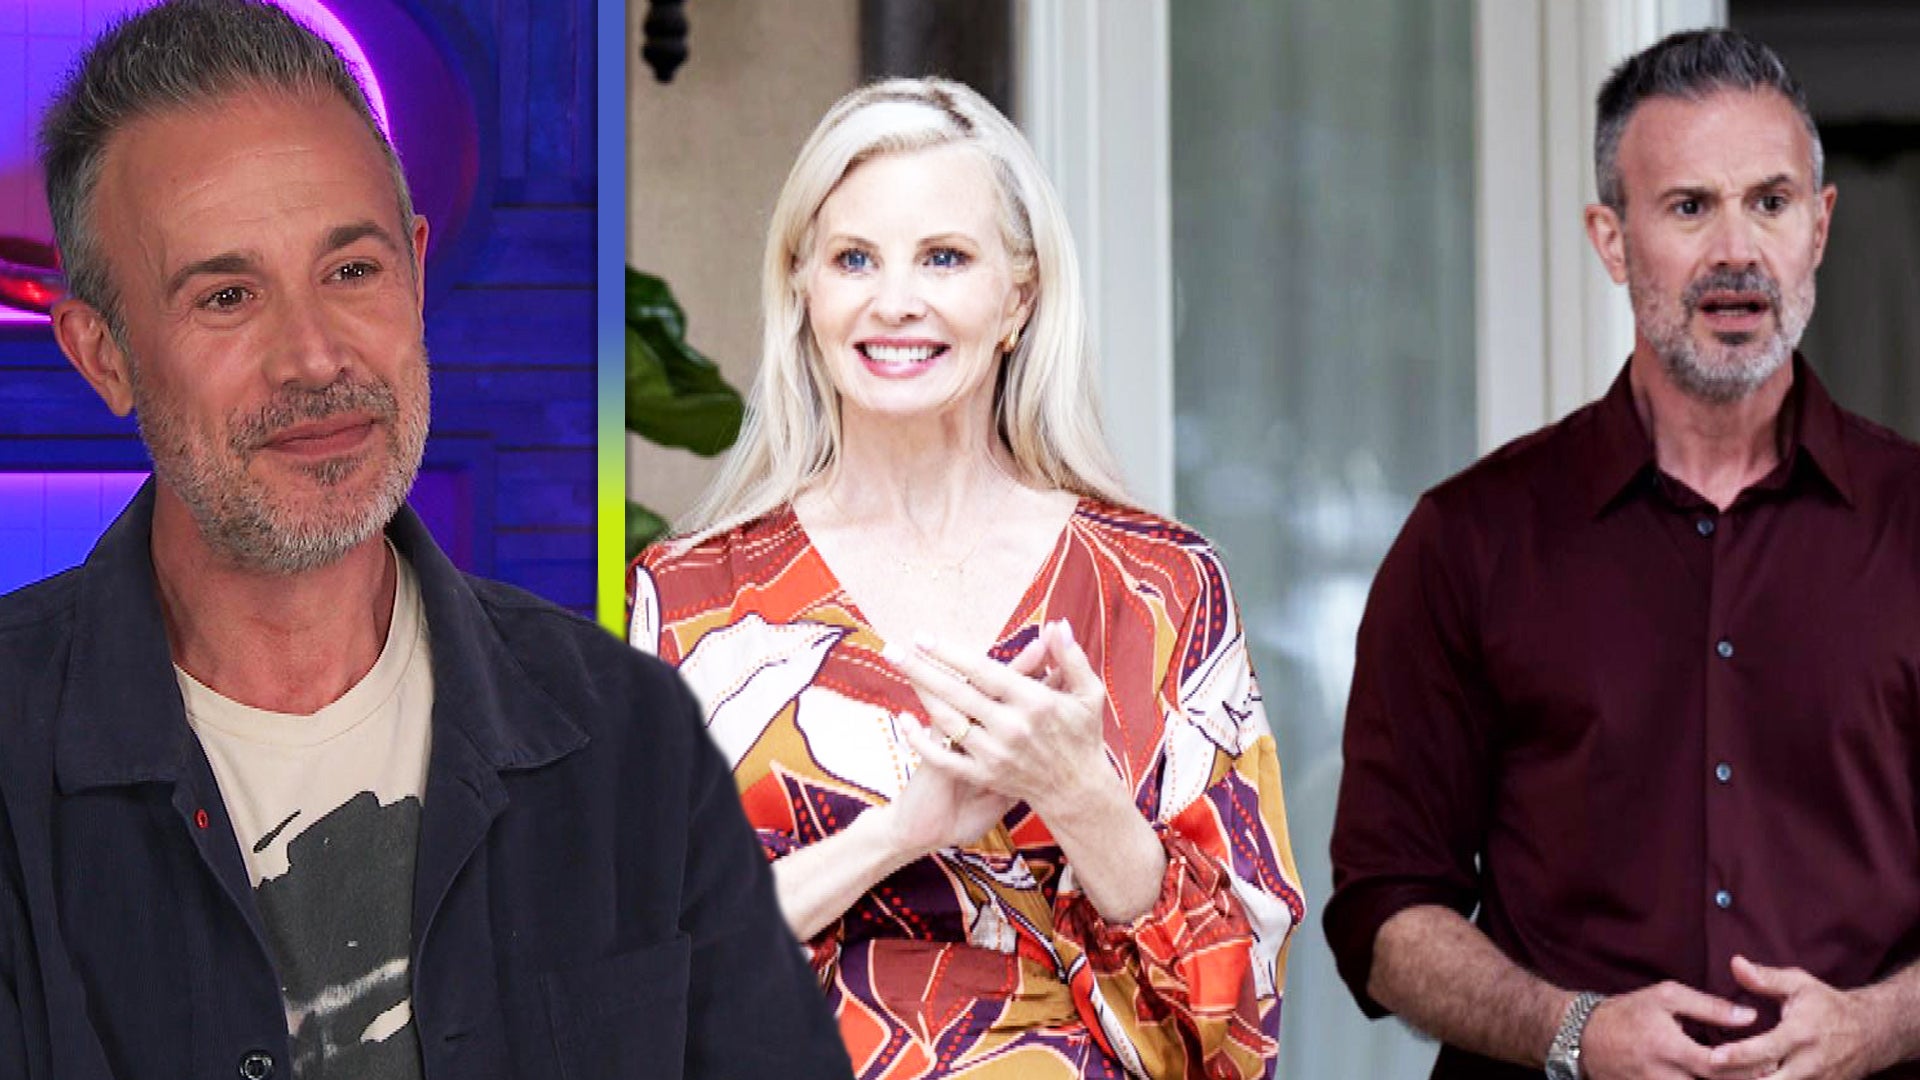 Freddie Prinze Jr. on Reuniting With Monica Potter 23 Years Later in ‘The Girl in the Pool’